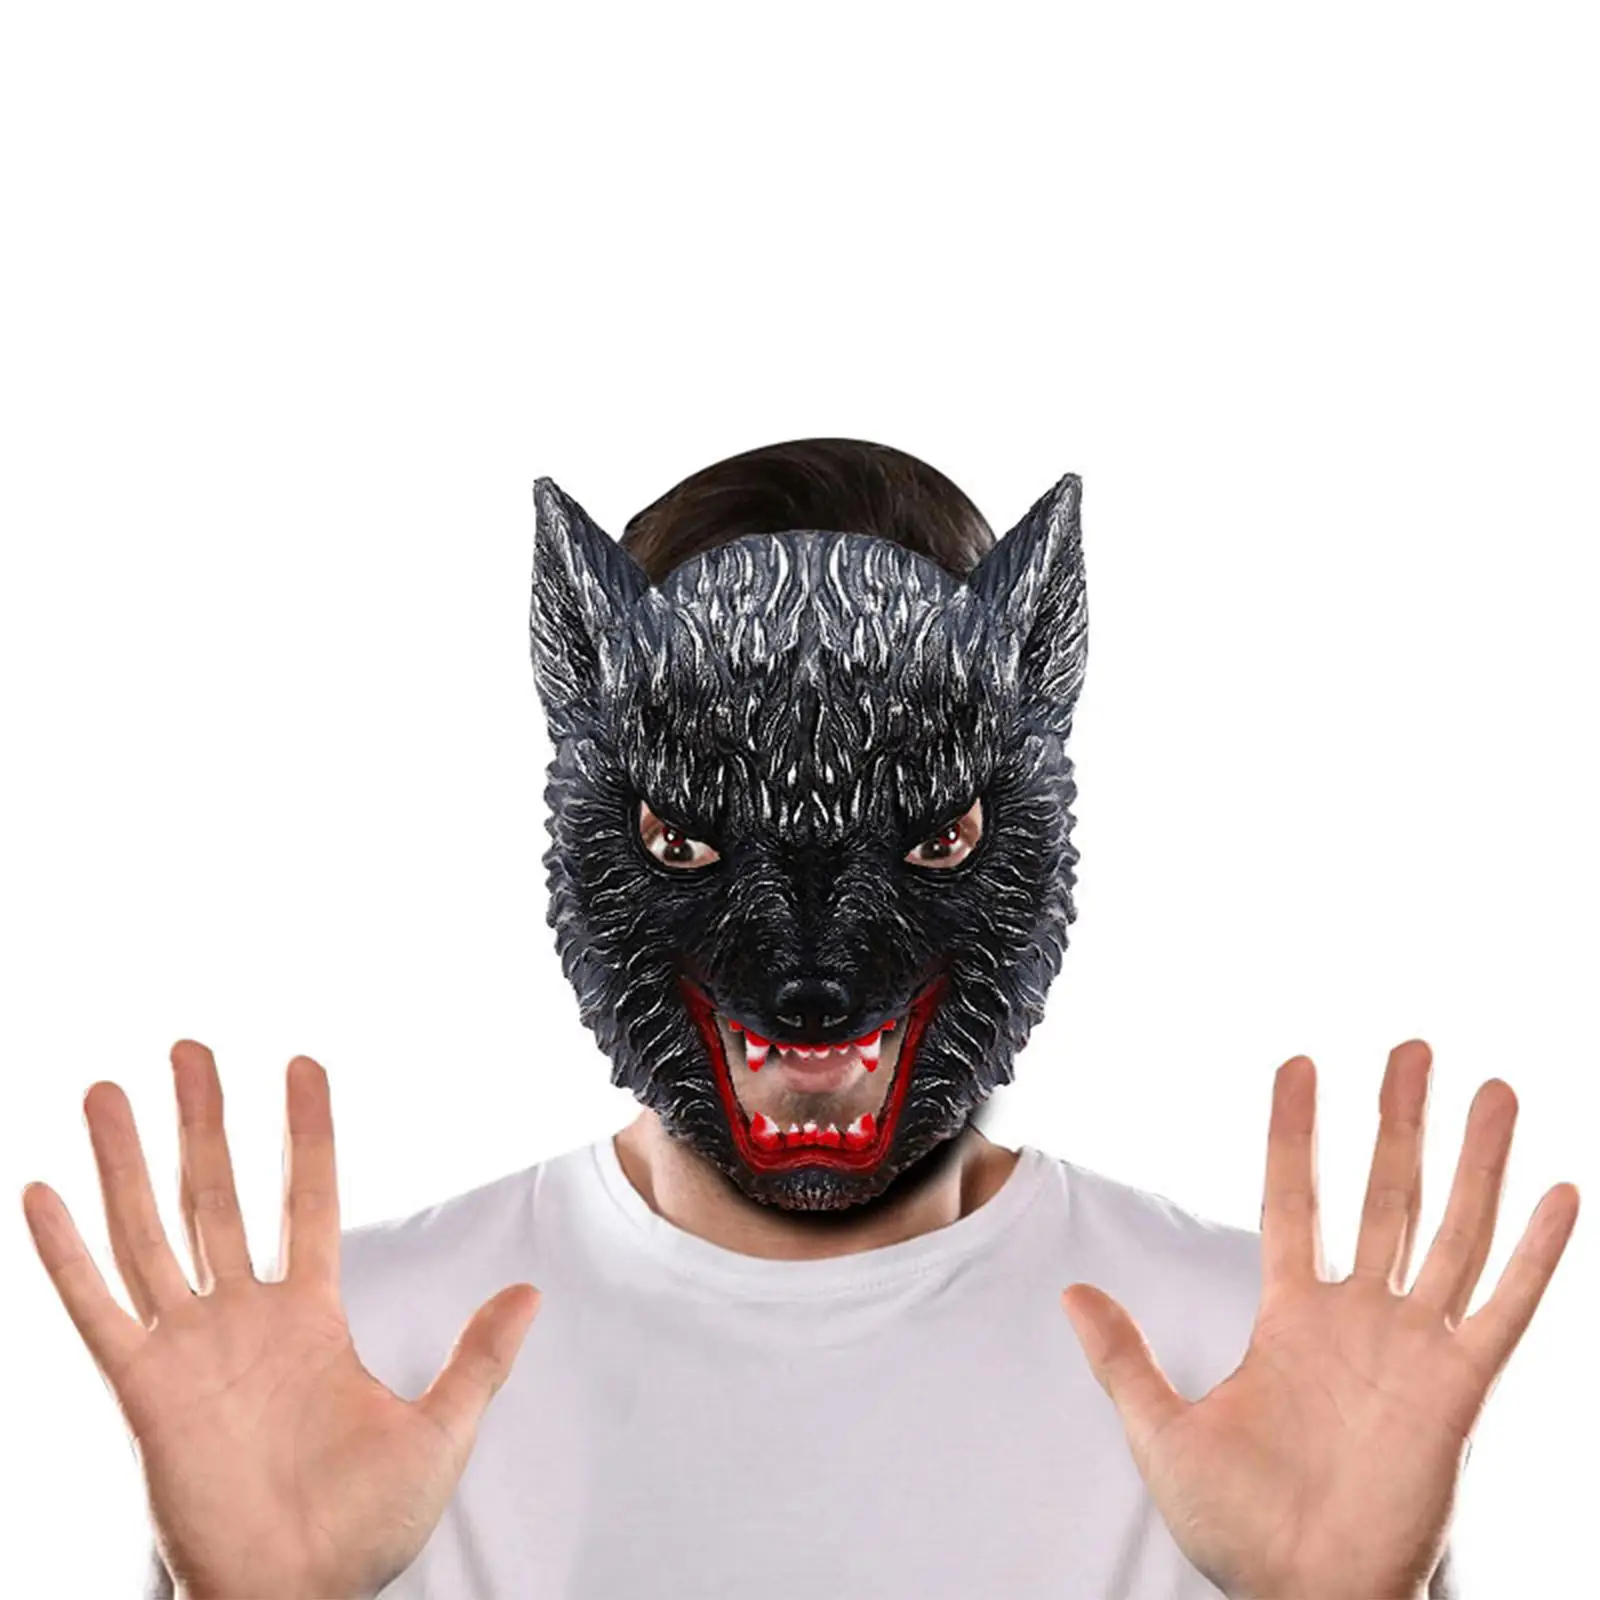 Halloween Wolf Mask ,Masquerade Cosplay Costume Party Supplies Werewolf Half Face for Theatrical Stage, Makeup Costume Props